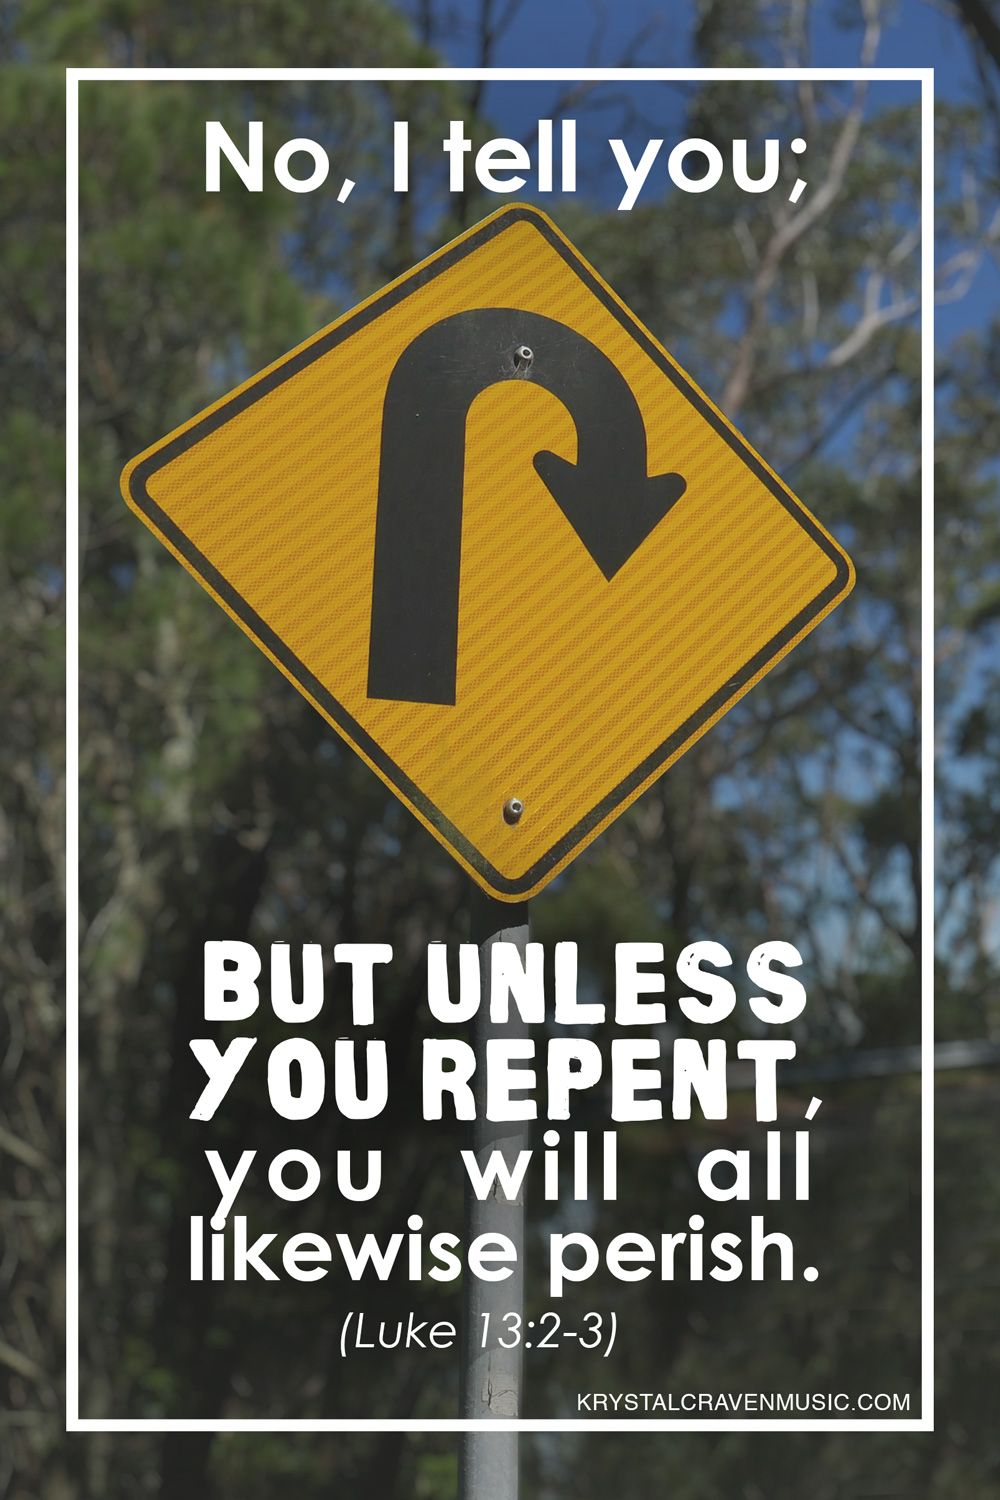 The text from Luke 13:2-3 that says "No, I tell you; but unless you repent, you will all likewise perish" over a u-turn ahead road sign with greenery in the background.